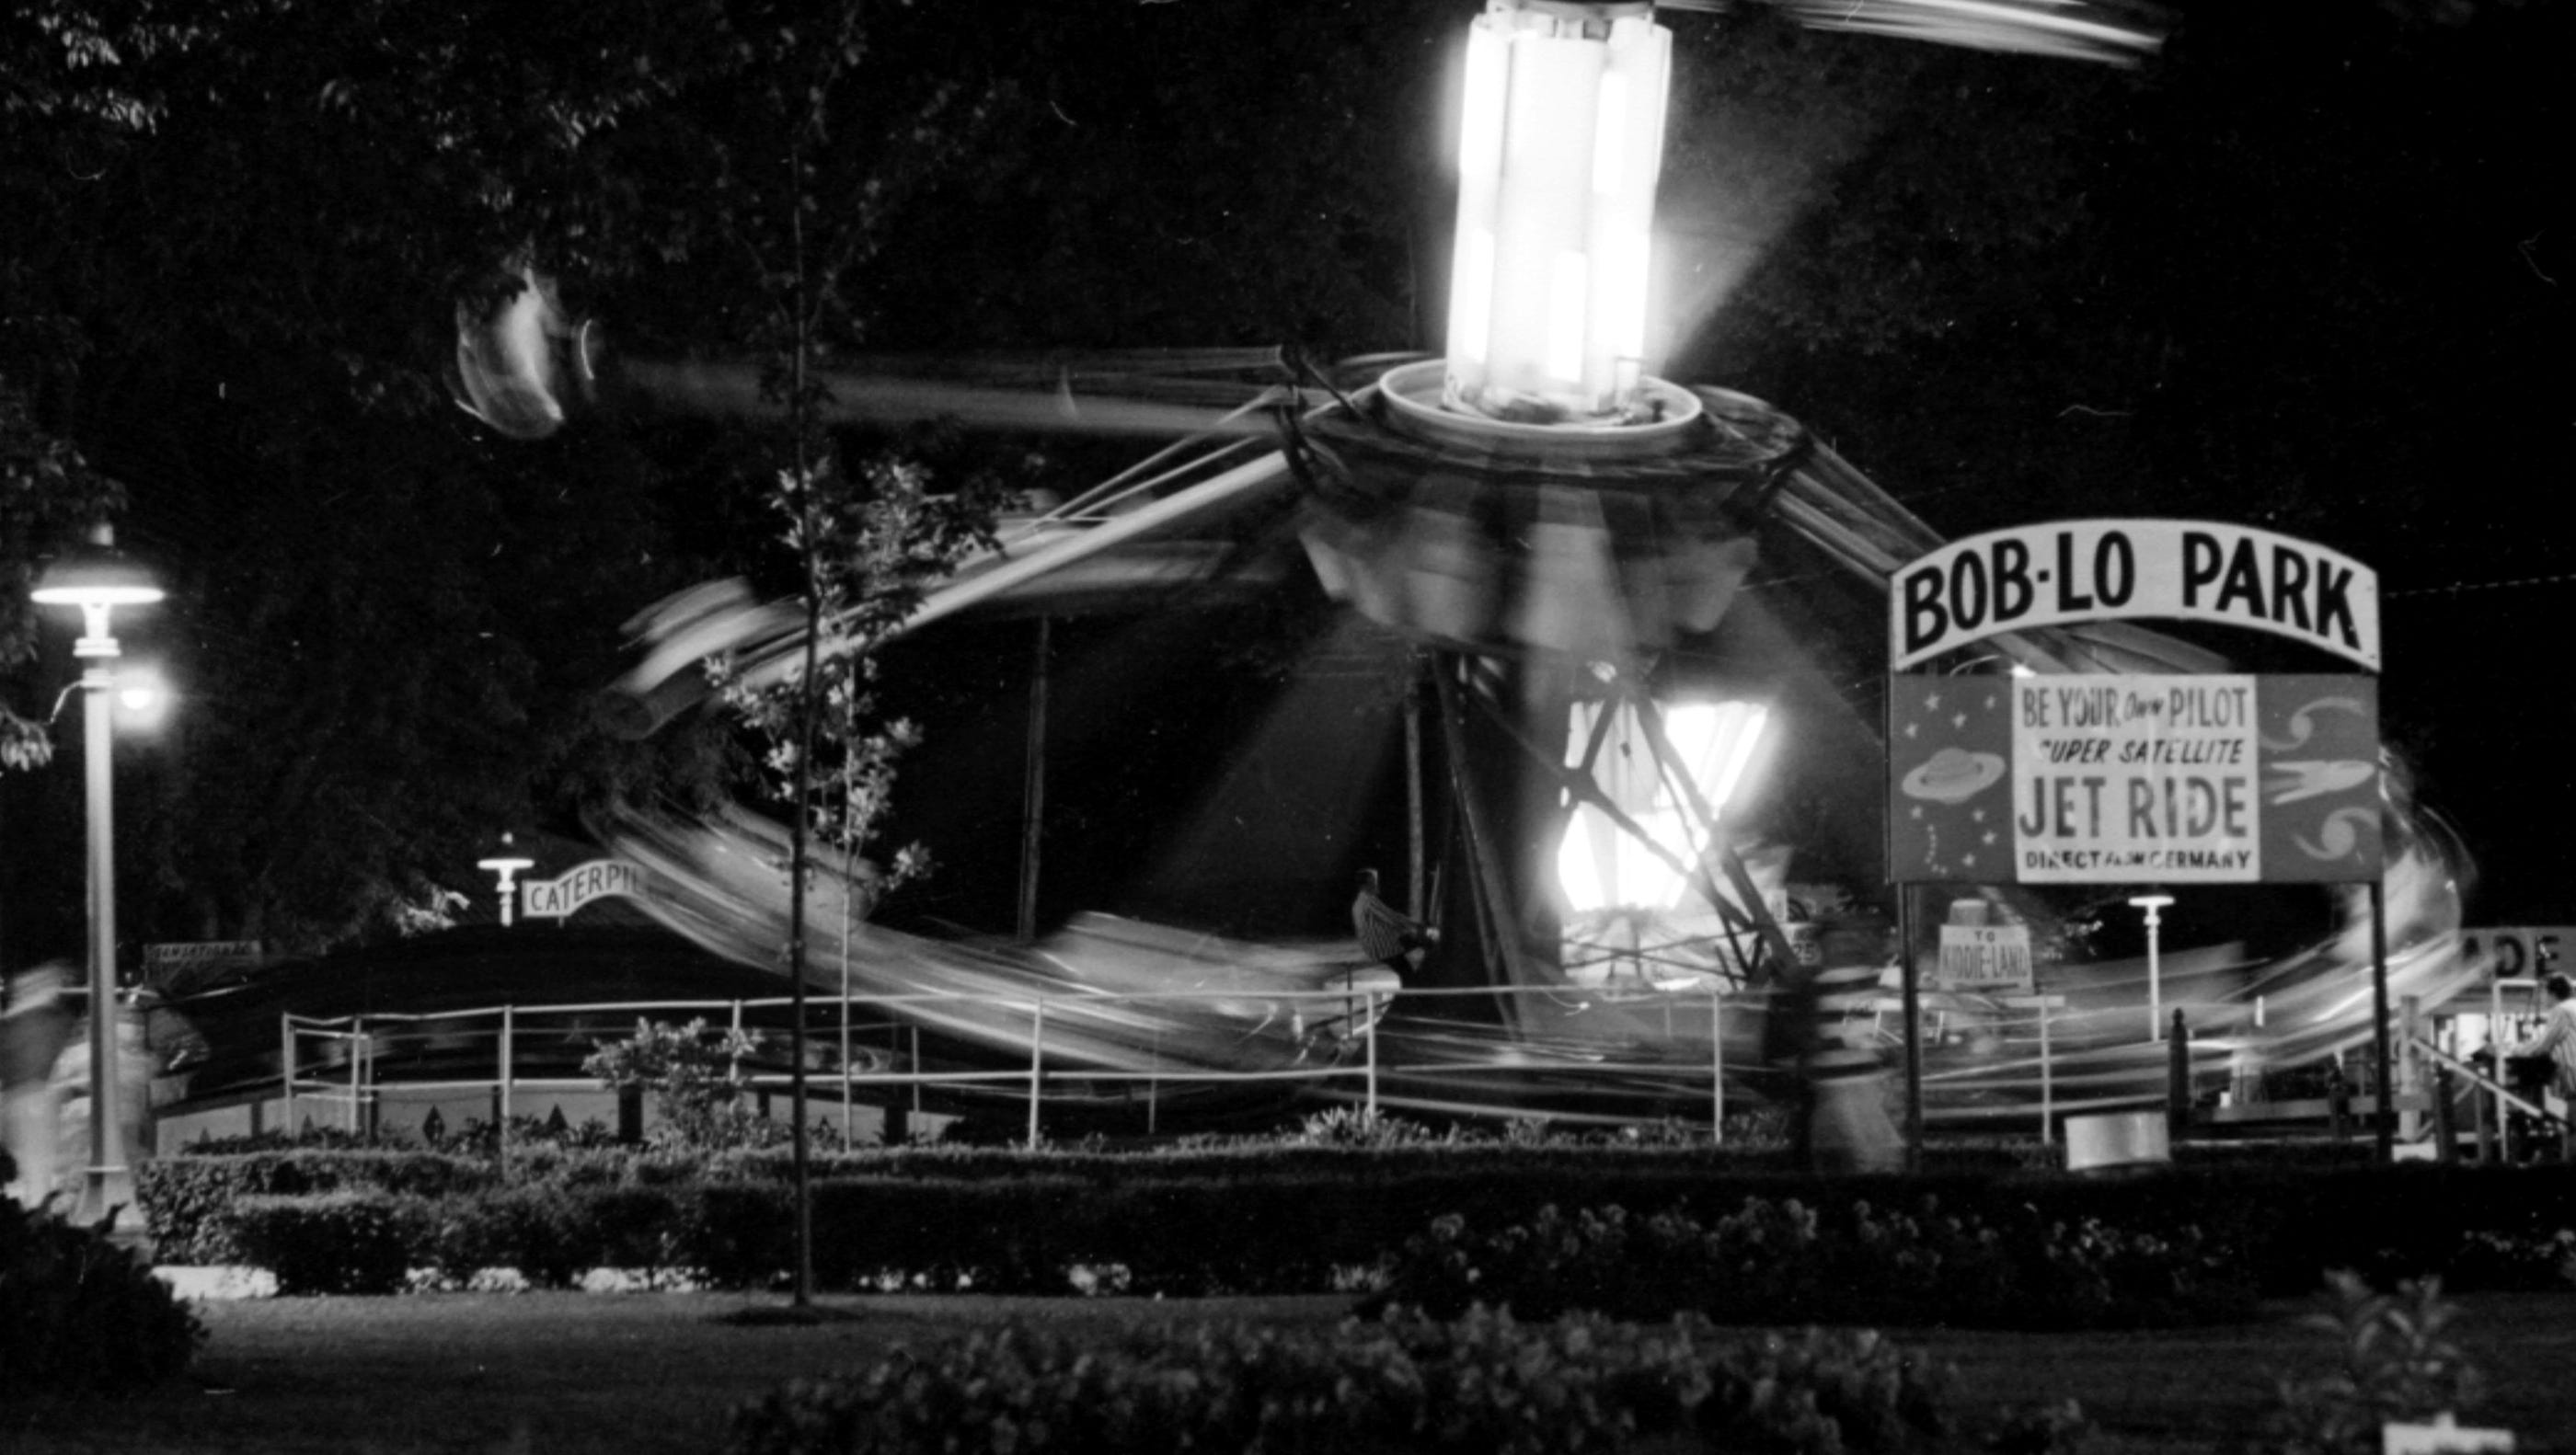 The rides are lit up at night on Boblo Island's amusement park in 1966.